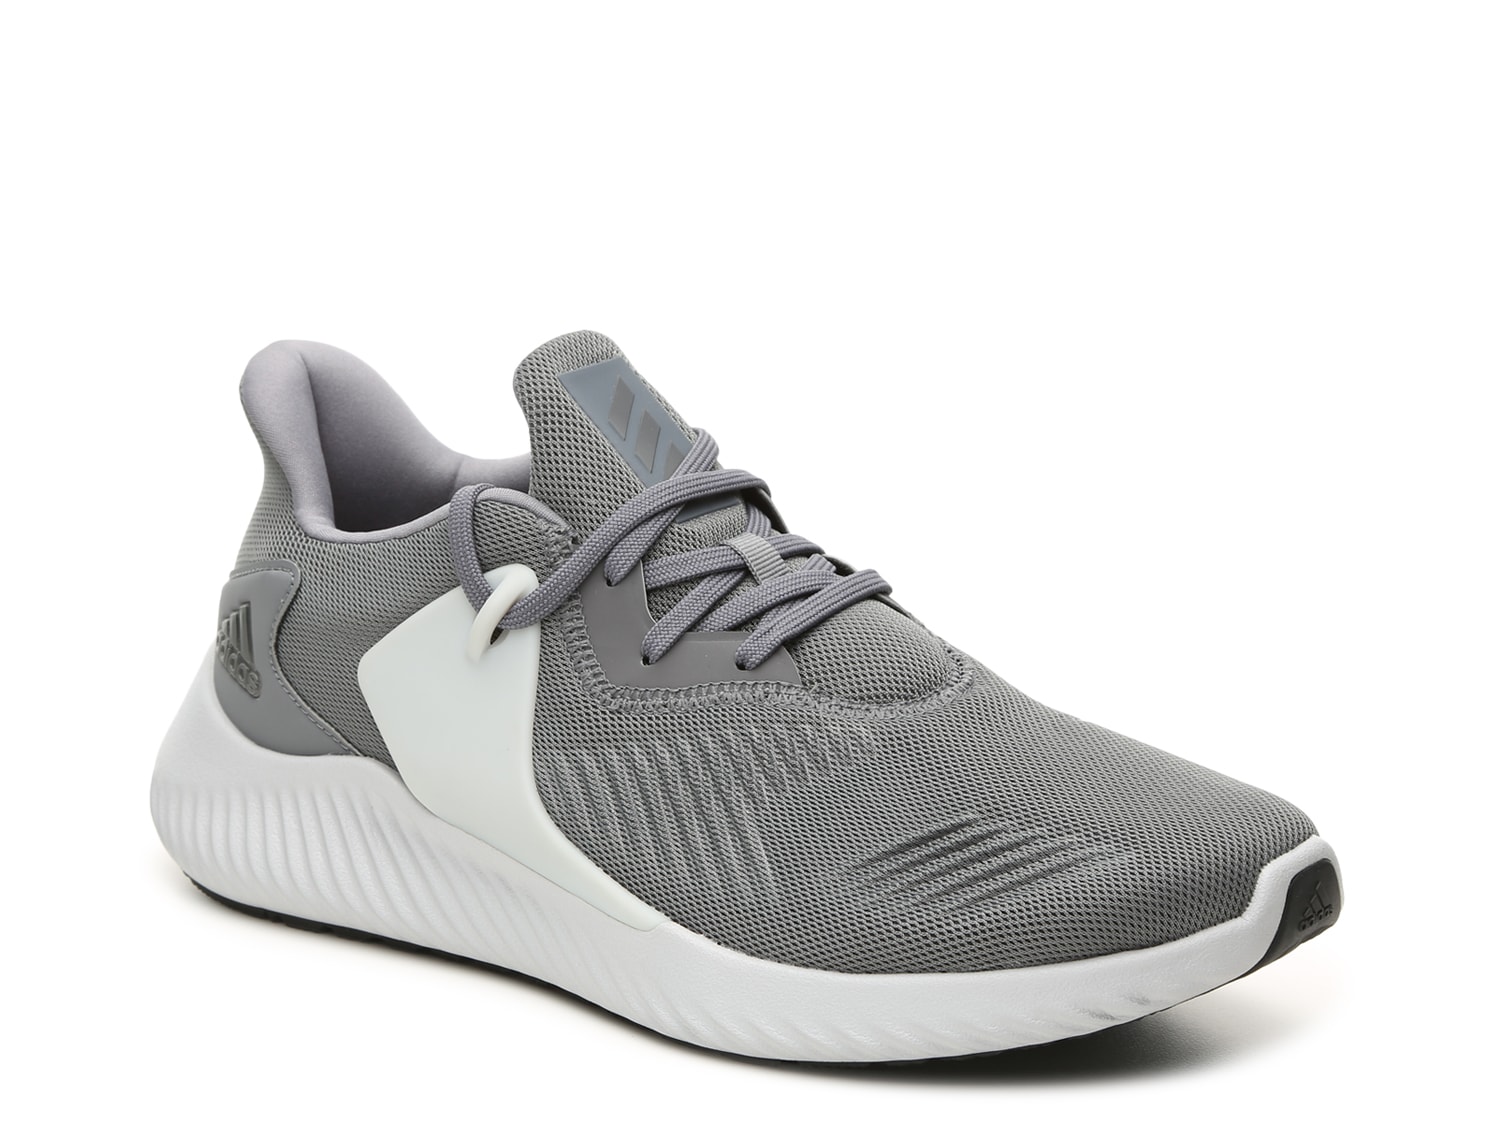 adidas Alphabounce RC 2 Running Shoe - Men's - Shipping | DSW